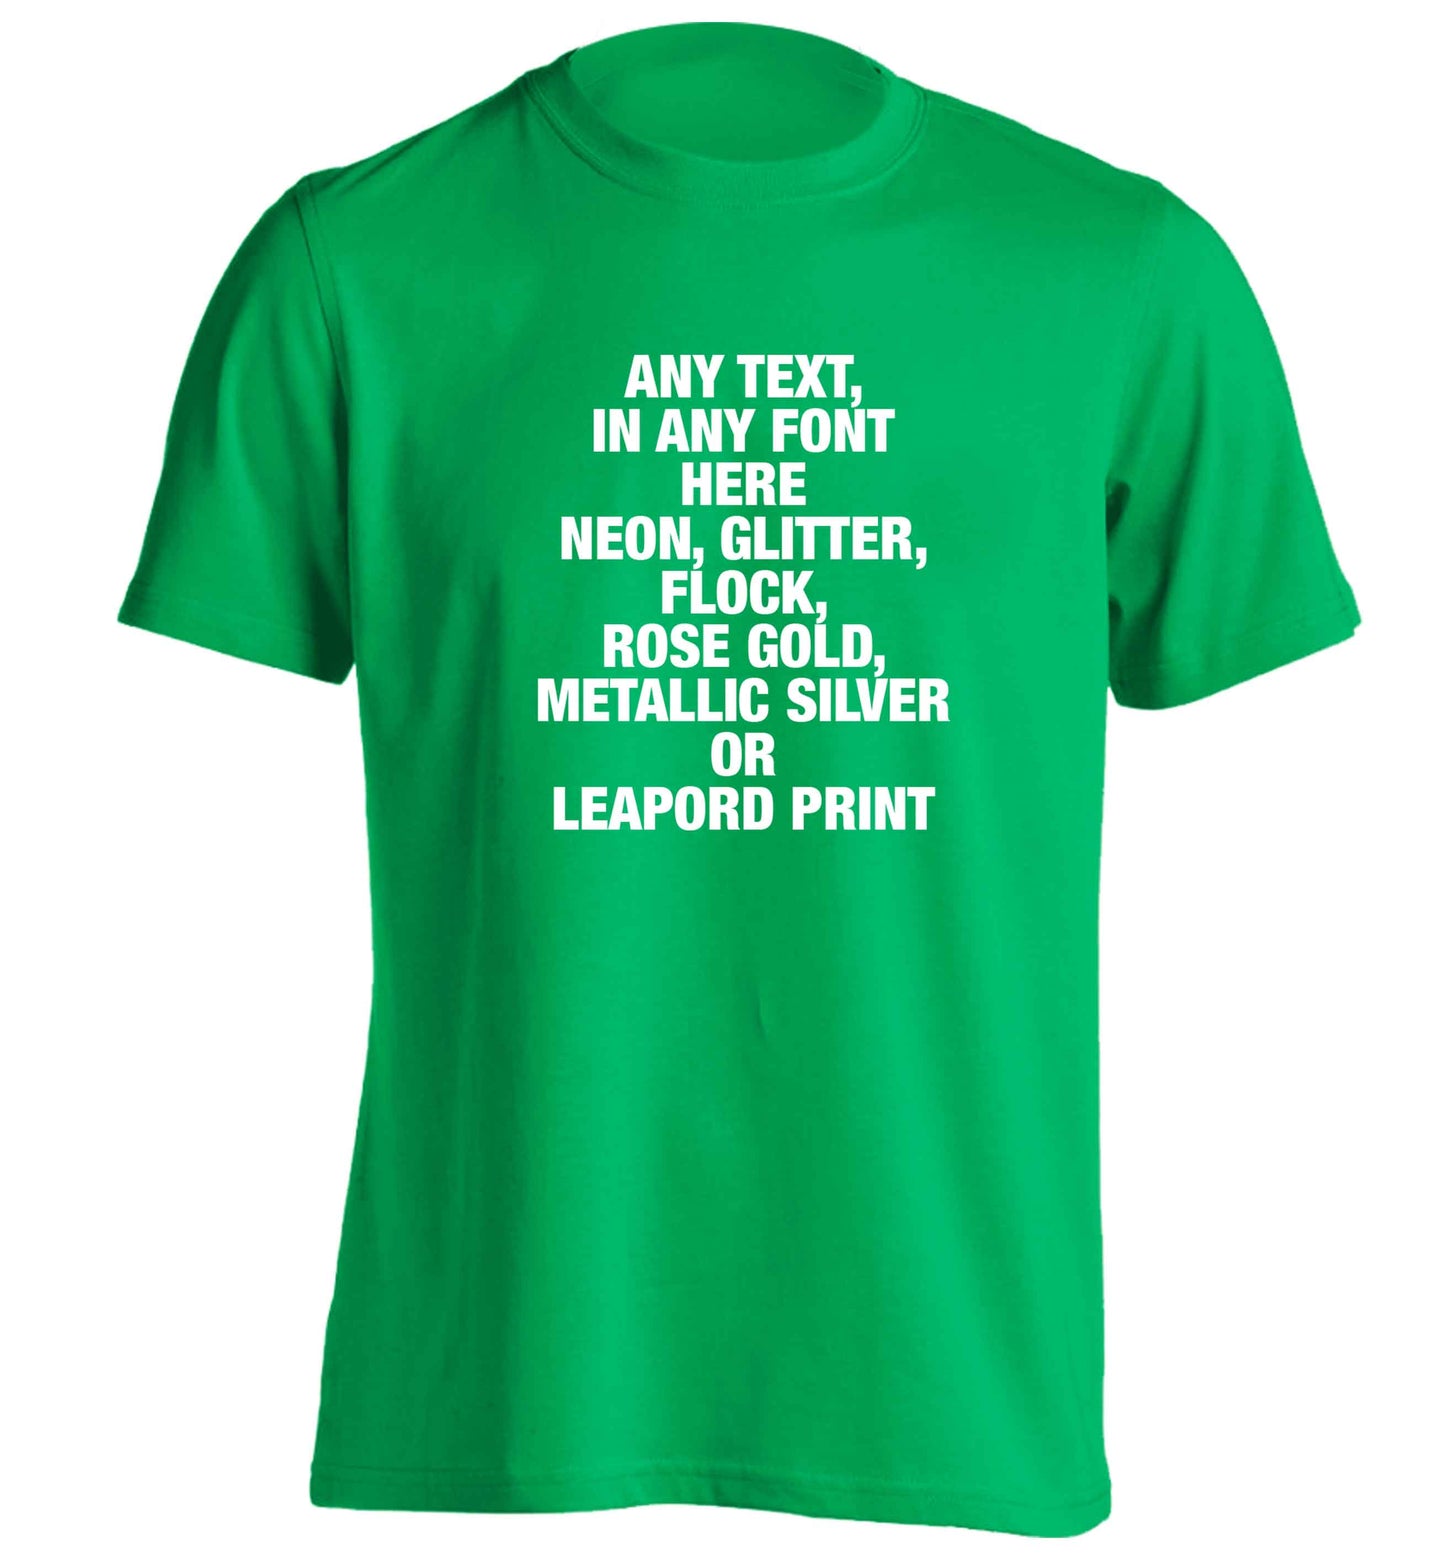 Premium custom order any text colour and font adults unisex green Tshirt 2XL